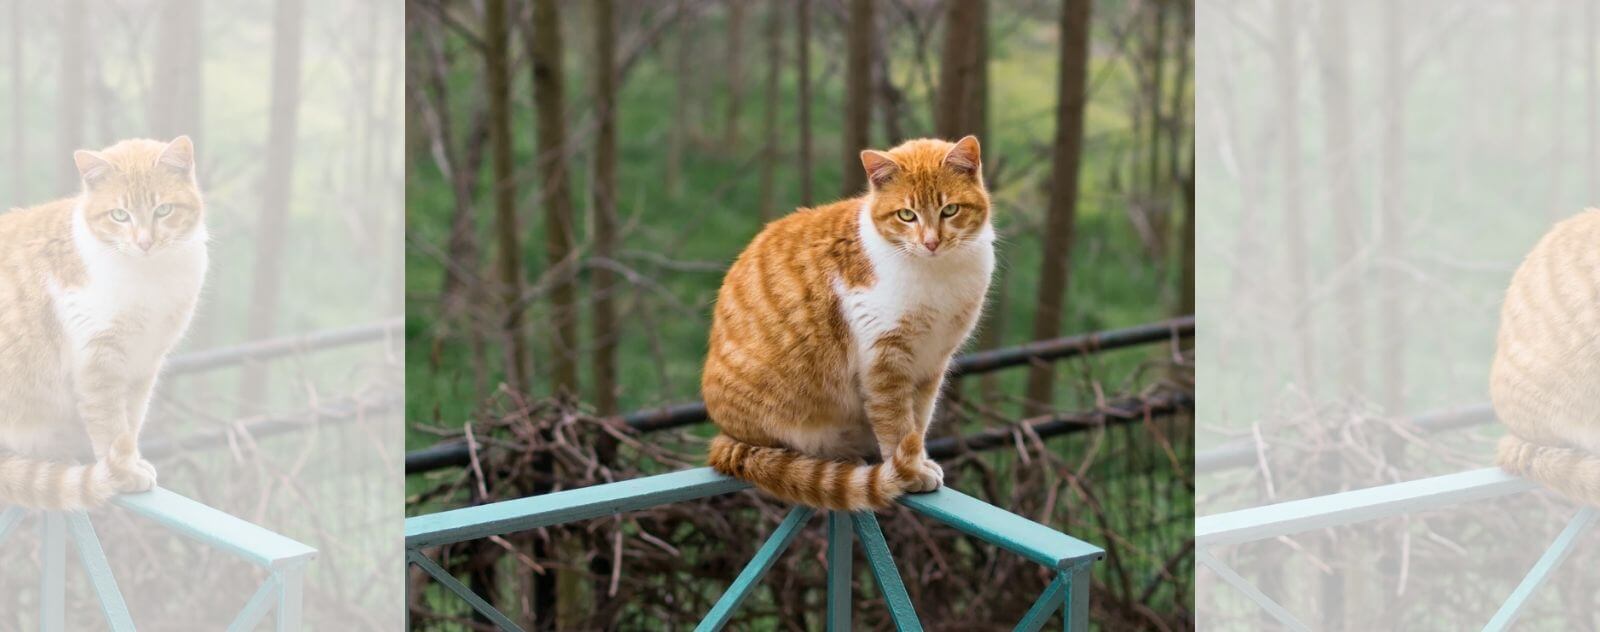 Fat Ginger and White Cat on a Fence